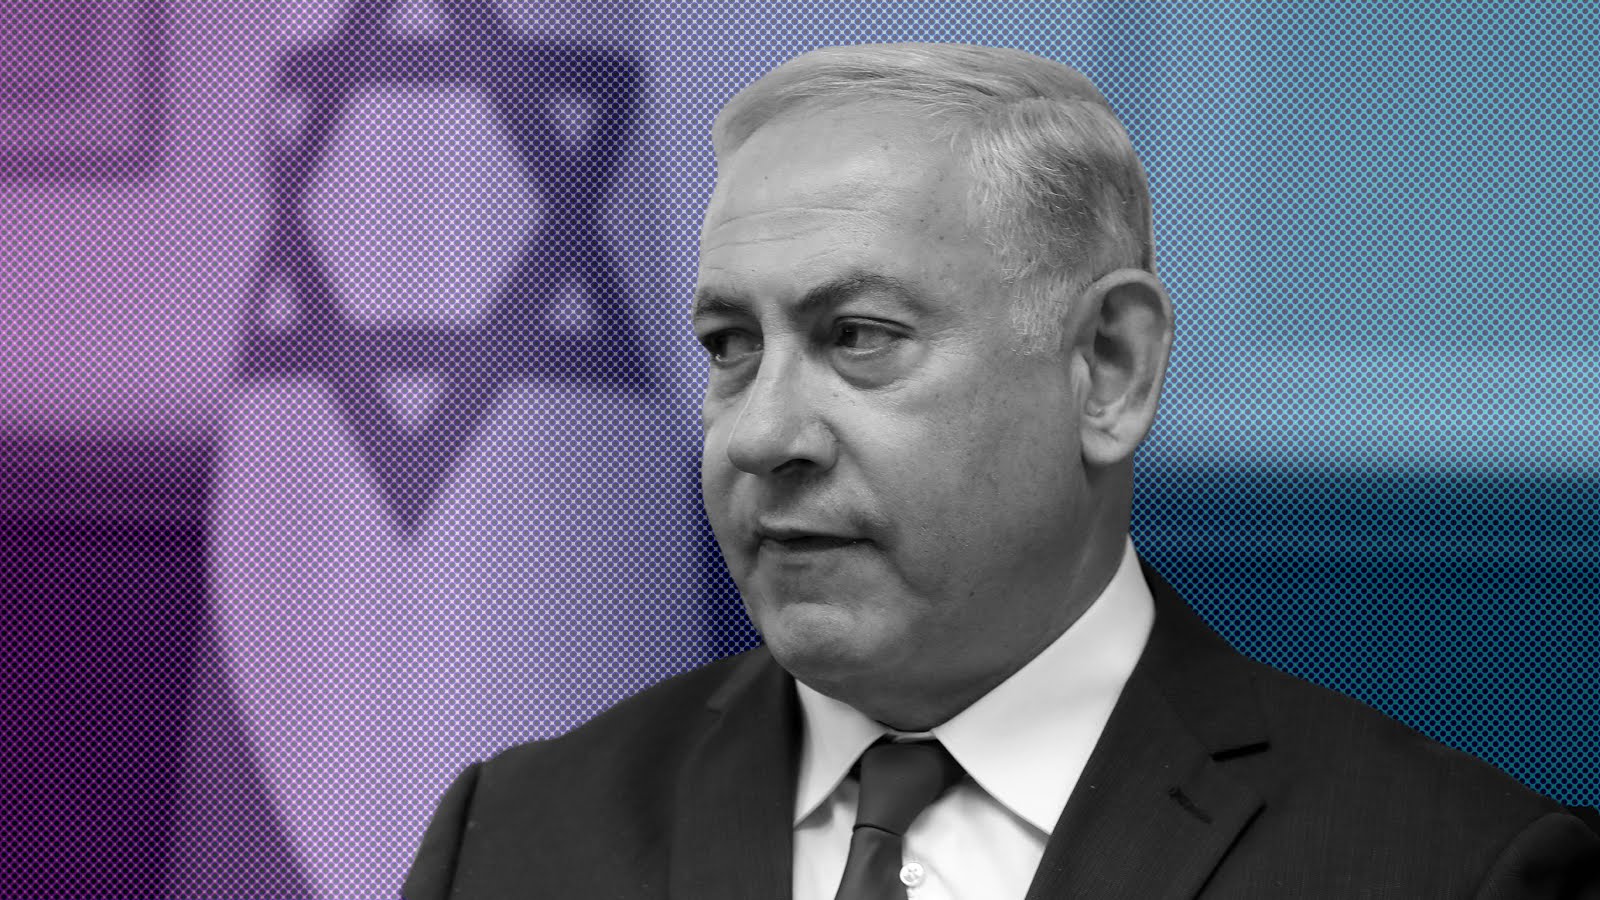 Netanyahu accused of spying on own staff